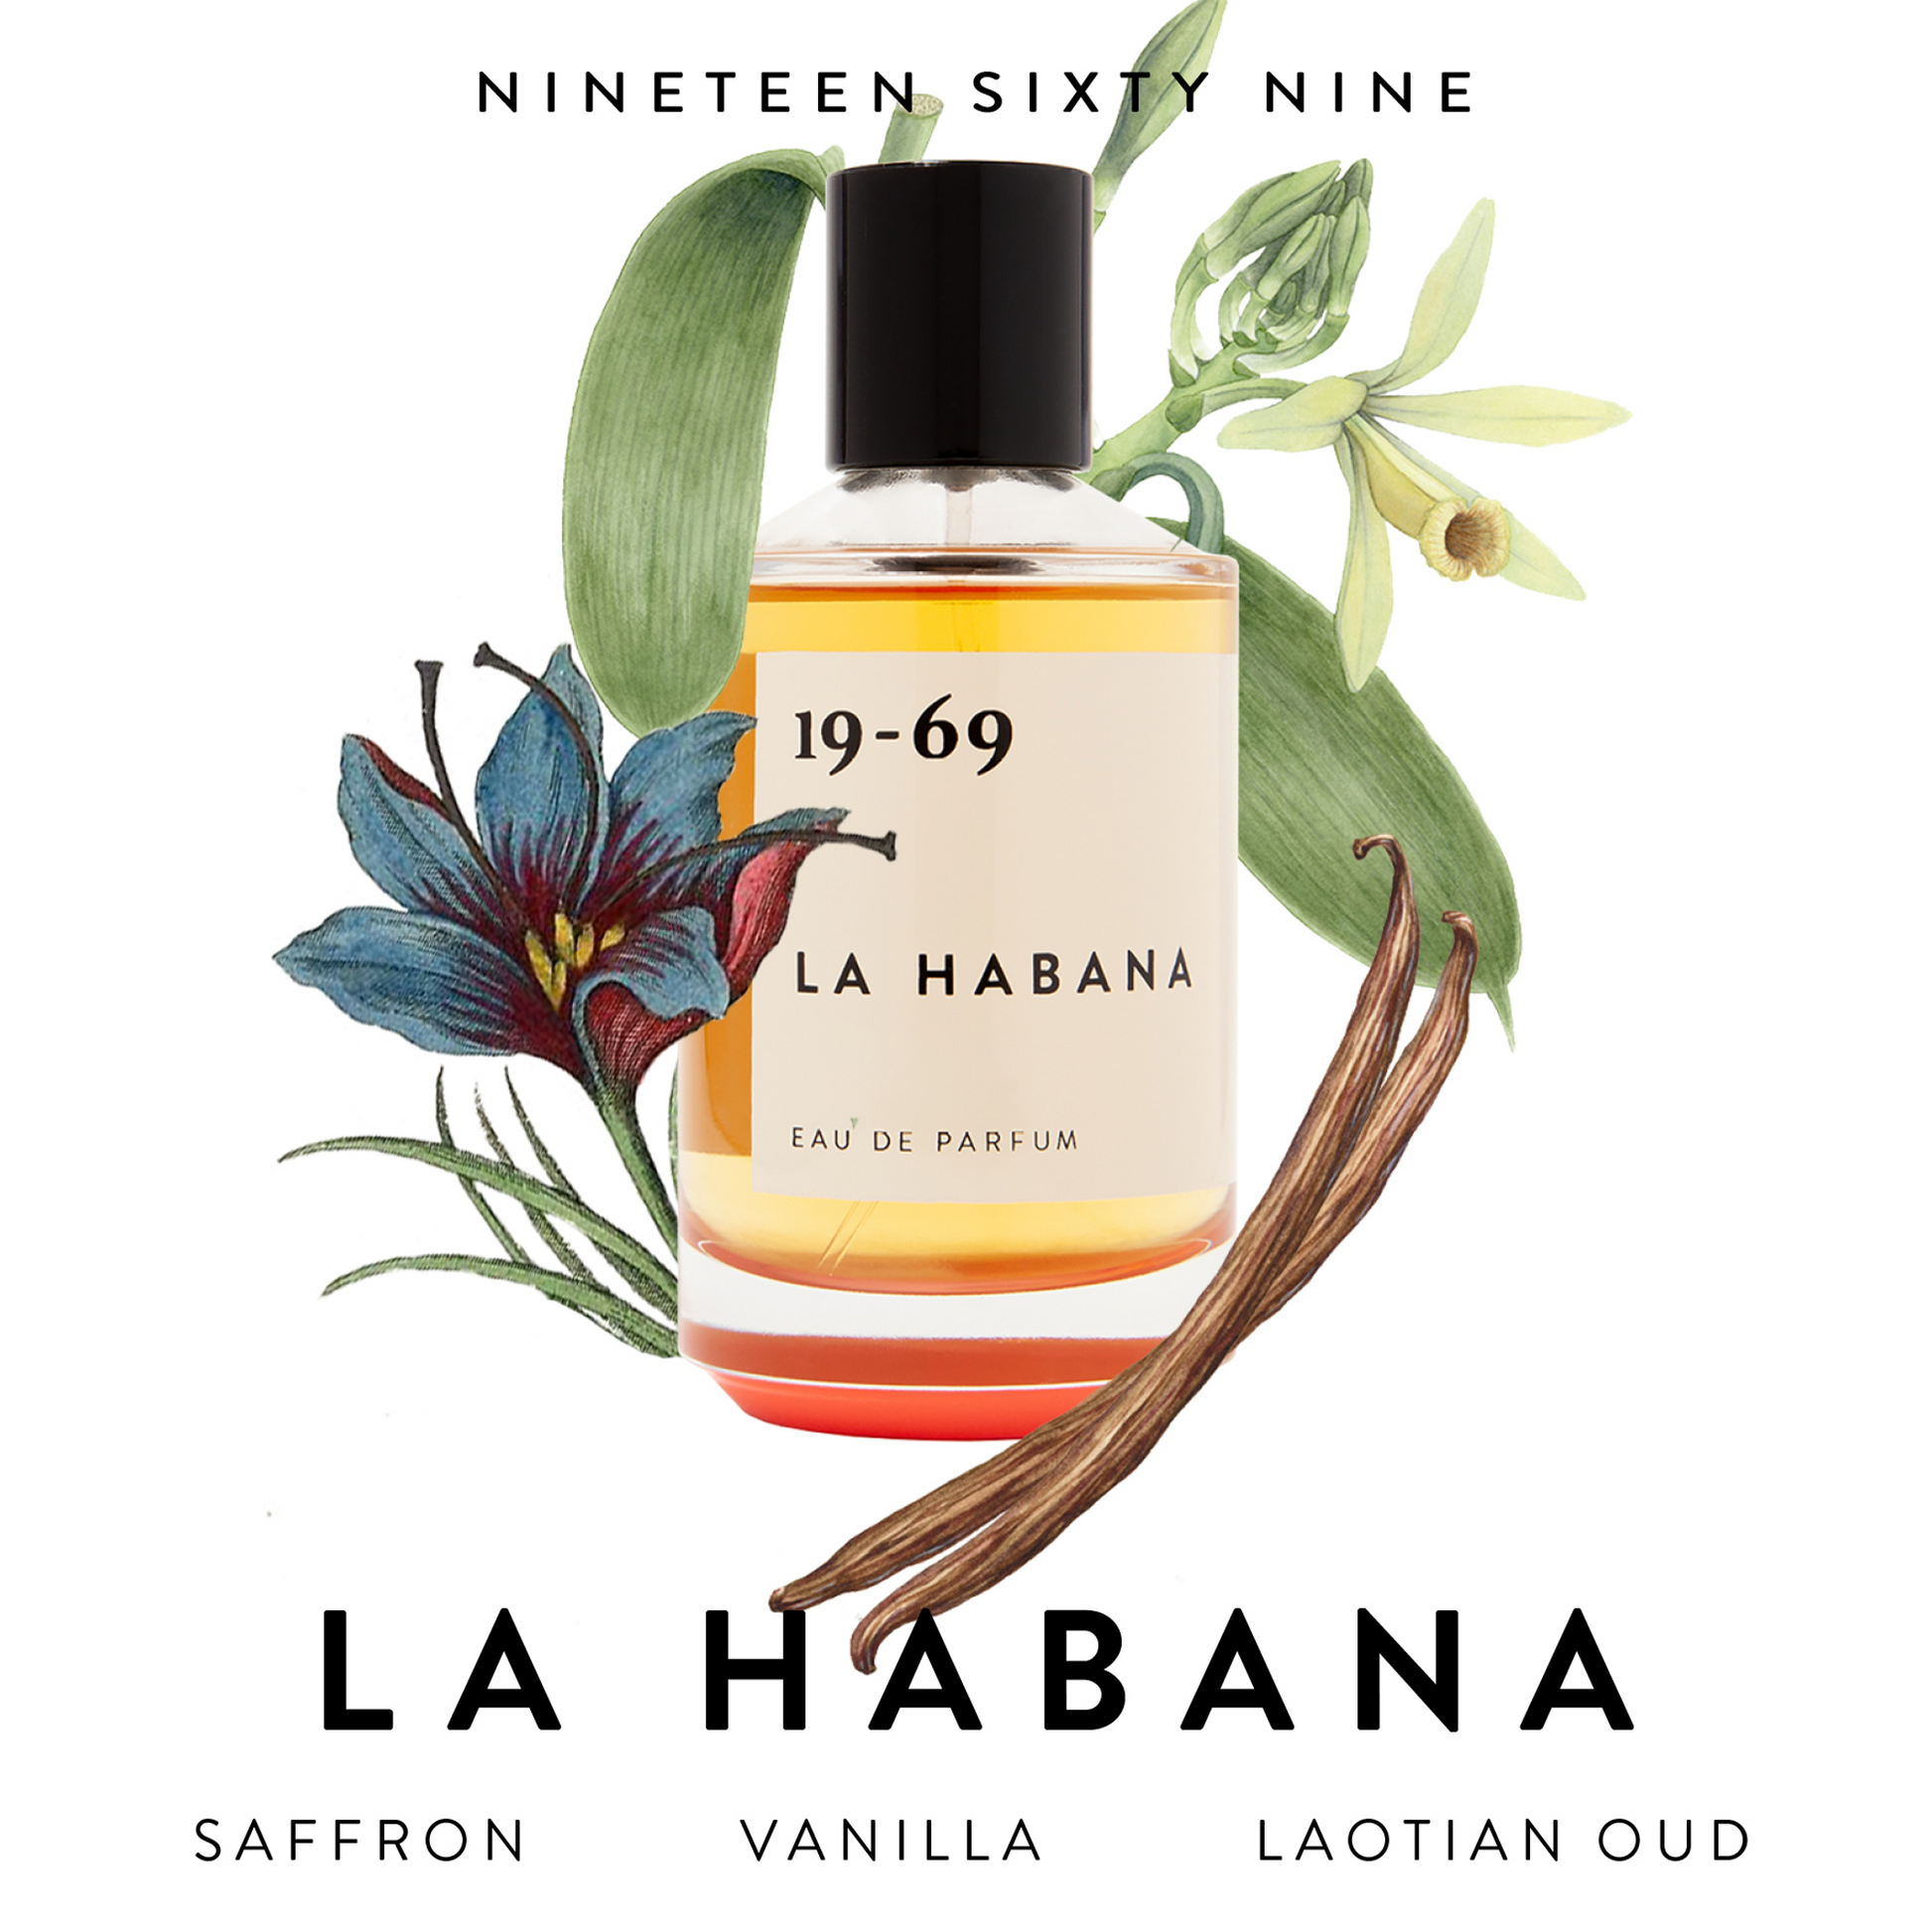 19-69 La Habana Perfume: The scent La Habana is based on a sailor’s reminiscence of Cuba before the revolution. The scent shines a light on the island’s golden musical era between the 1930s and 1950s.  The scent is aromatic, smokey and alluring. Fragrance notes include Saffron, Incense Resinoid and Laotian Oud. All 19-69 fragrances are suitable for any gender.